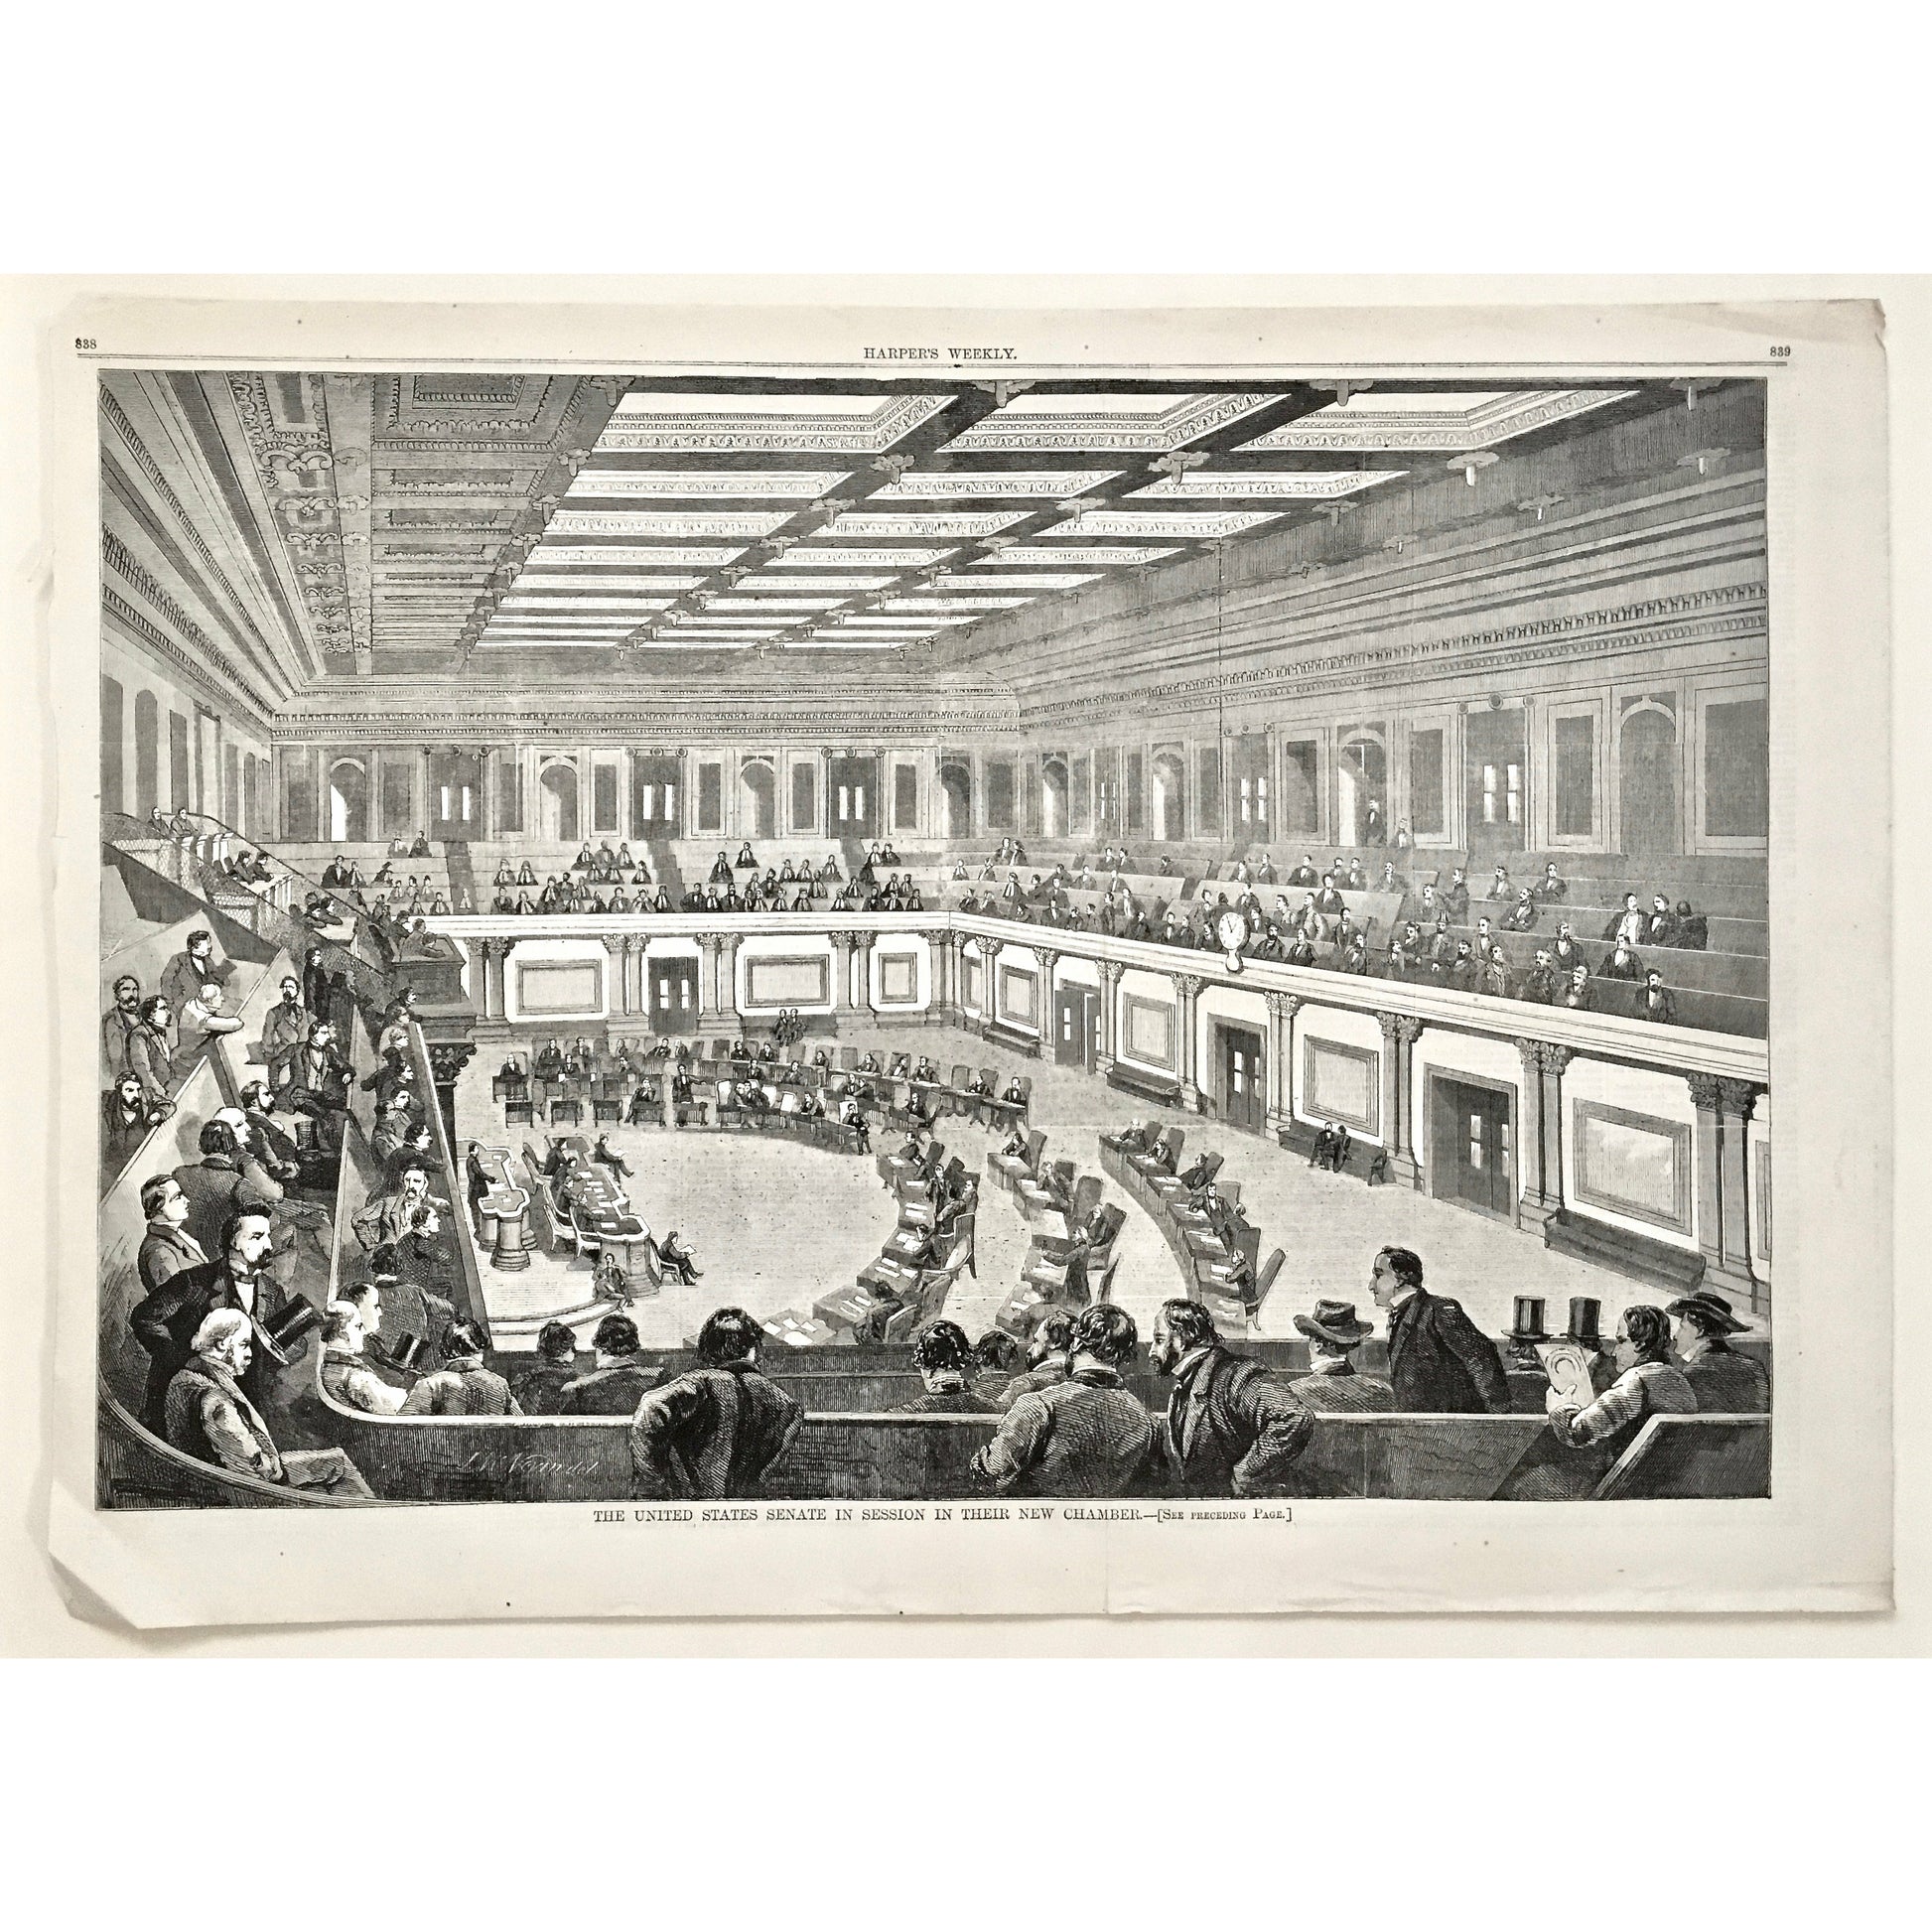 US, United States, US Senate, Senate, Senate in Session, Senate Session, Chamber, Senate Chamber, Senators, US Capitol, Capitol, Capitol building, American Politics, politics, politicians, Session, Senate building, American History, Political History, Harper's Weekly, Harper's, 1859, steel engraving, newspaper, newspapers, Antique, Prints, Vintage, Old US, US history, printmaking, art history, wall decor, home decor, wall art, office art, design, engraving, art, prints, 